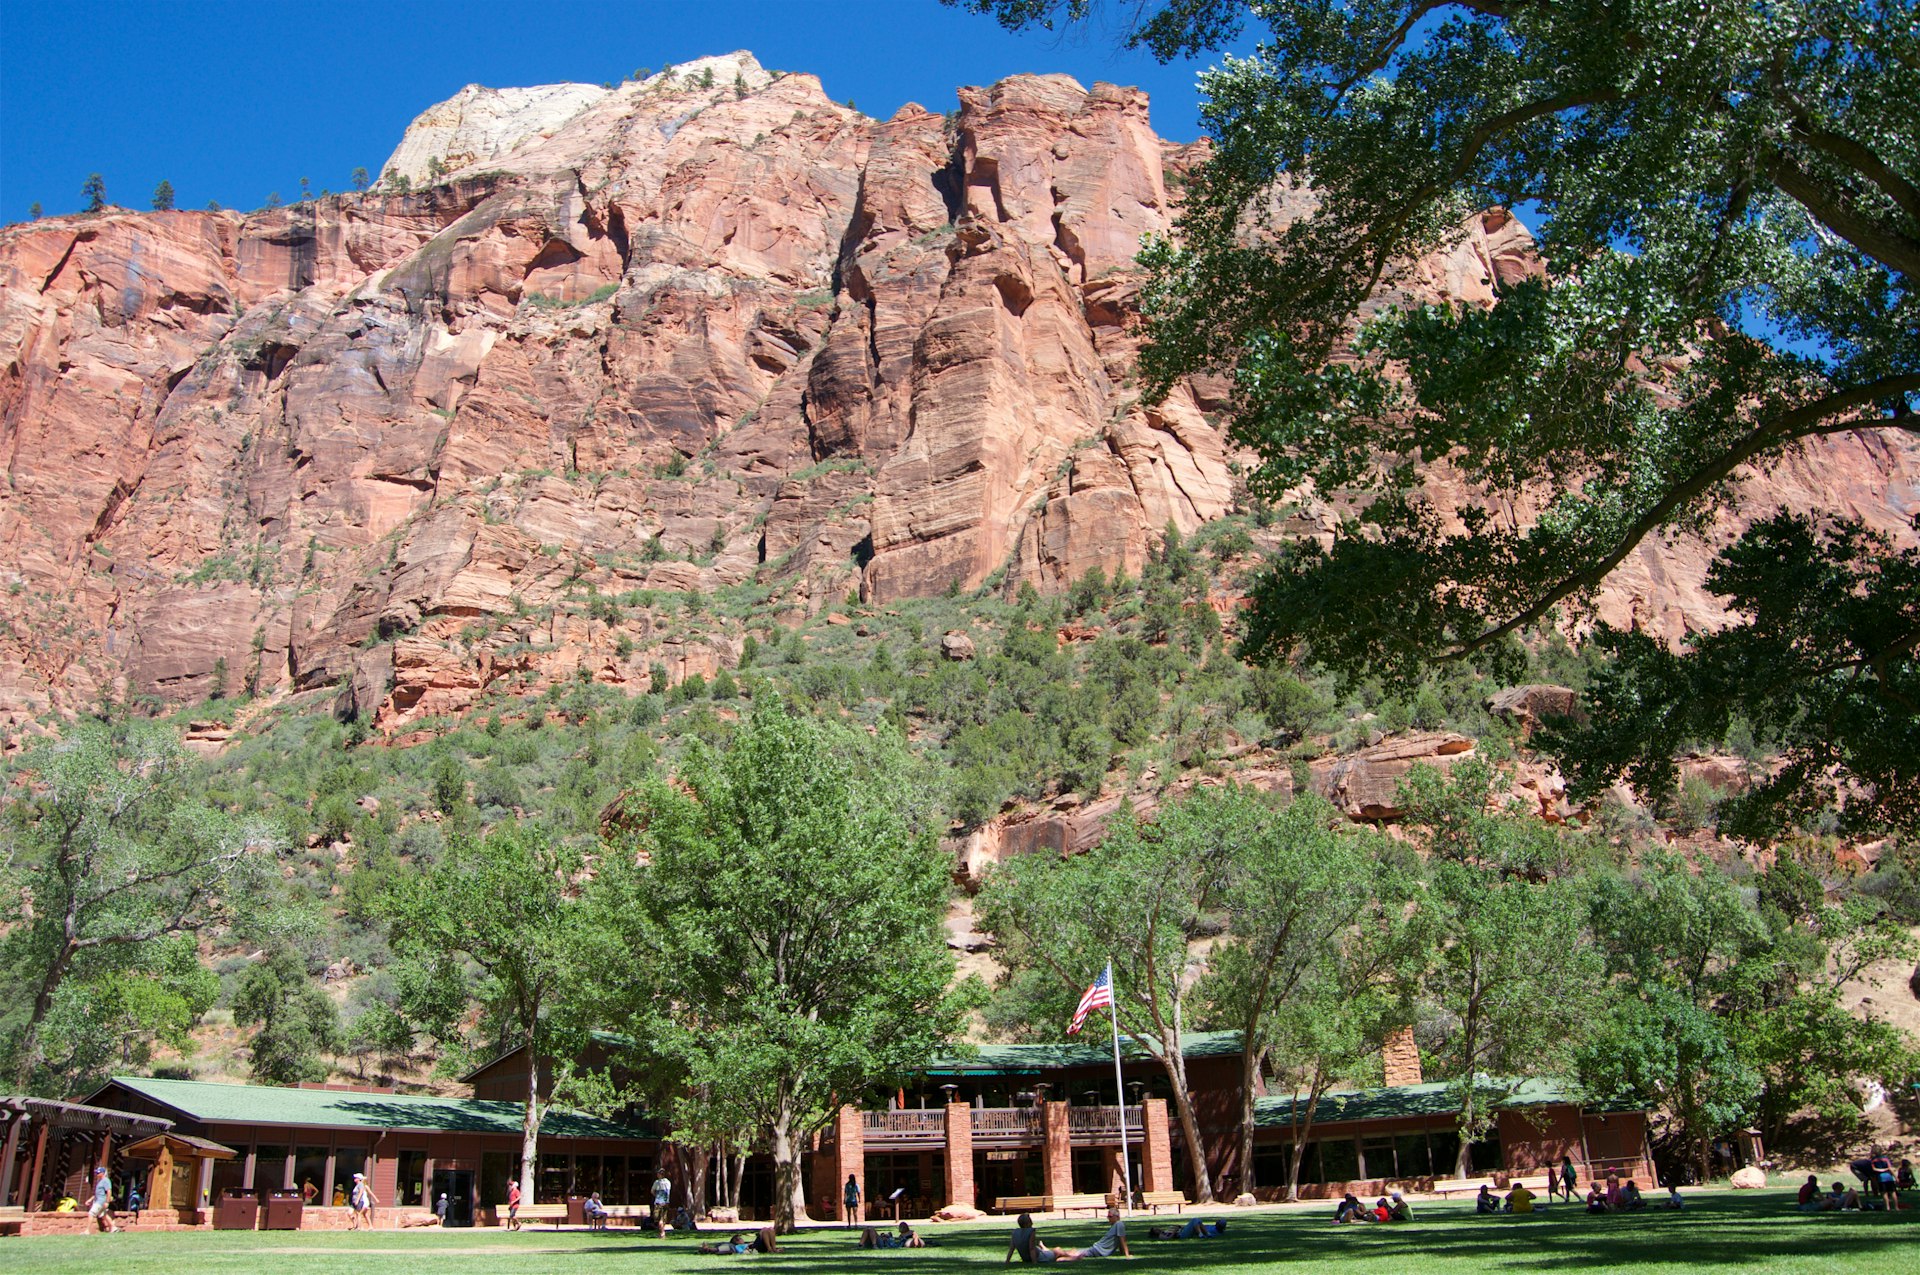 Low-angle view of tourists relaxing on the lawn of Zion Lodge at Zion National Park, Utah, USA